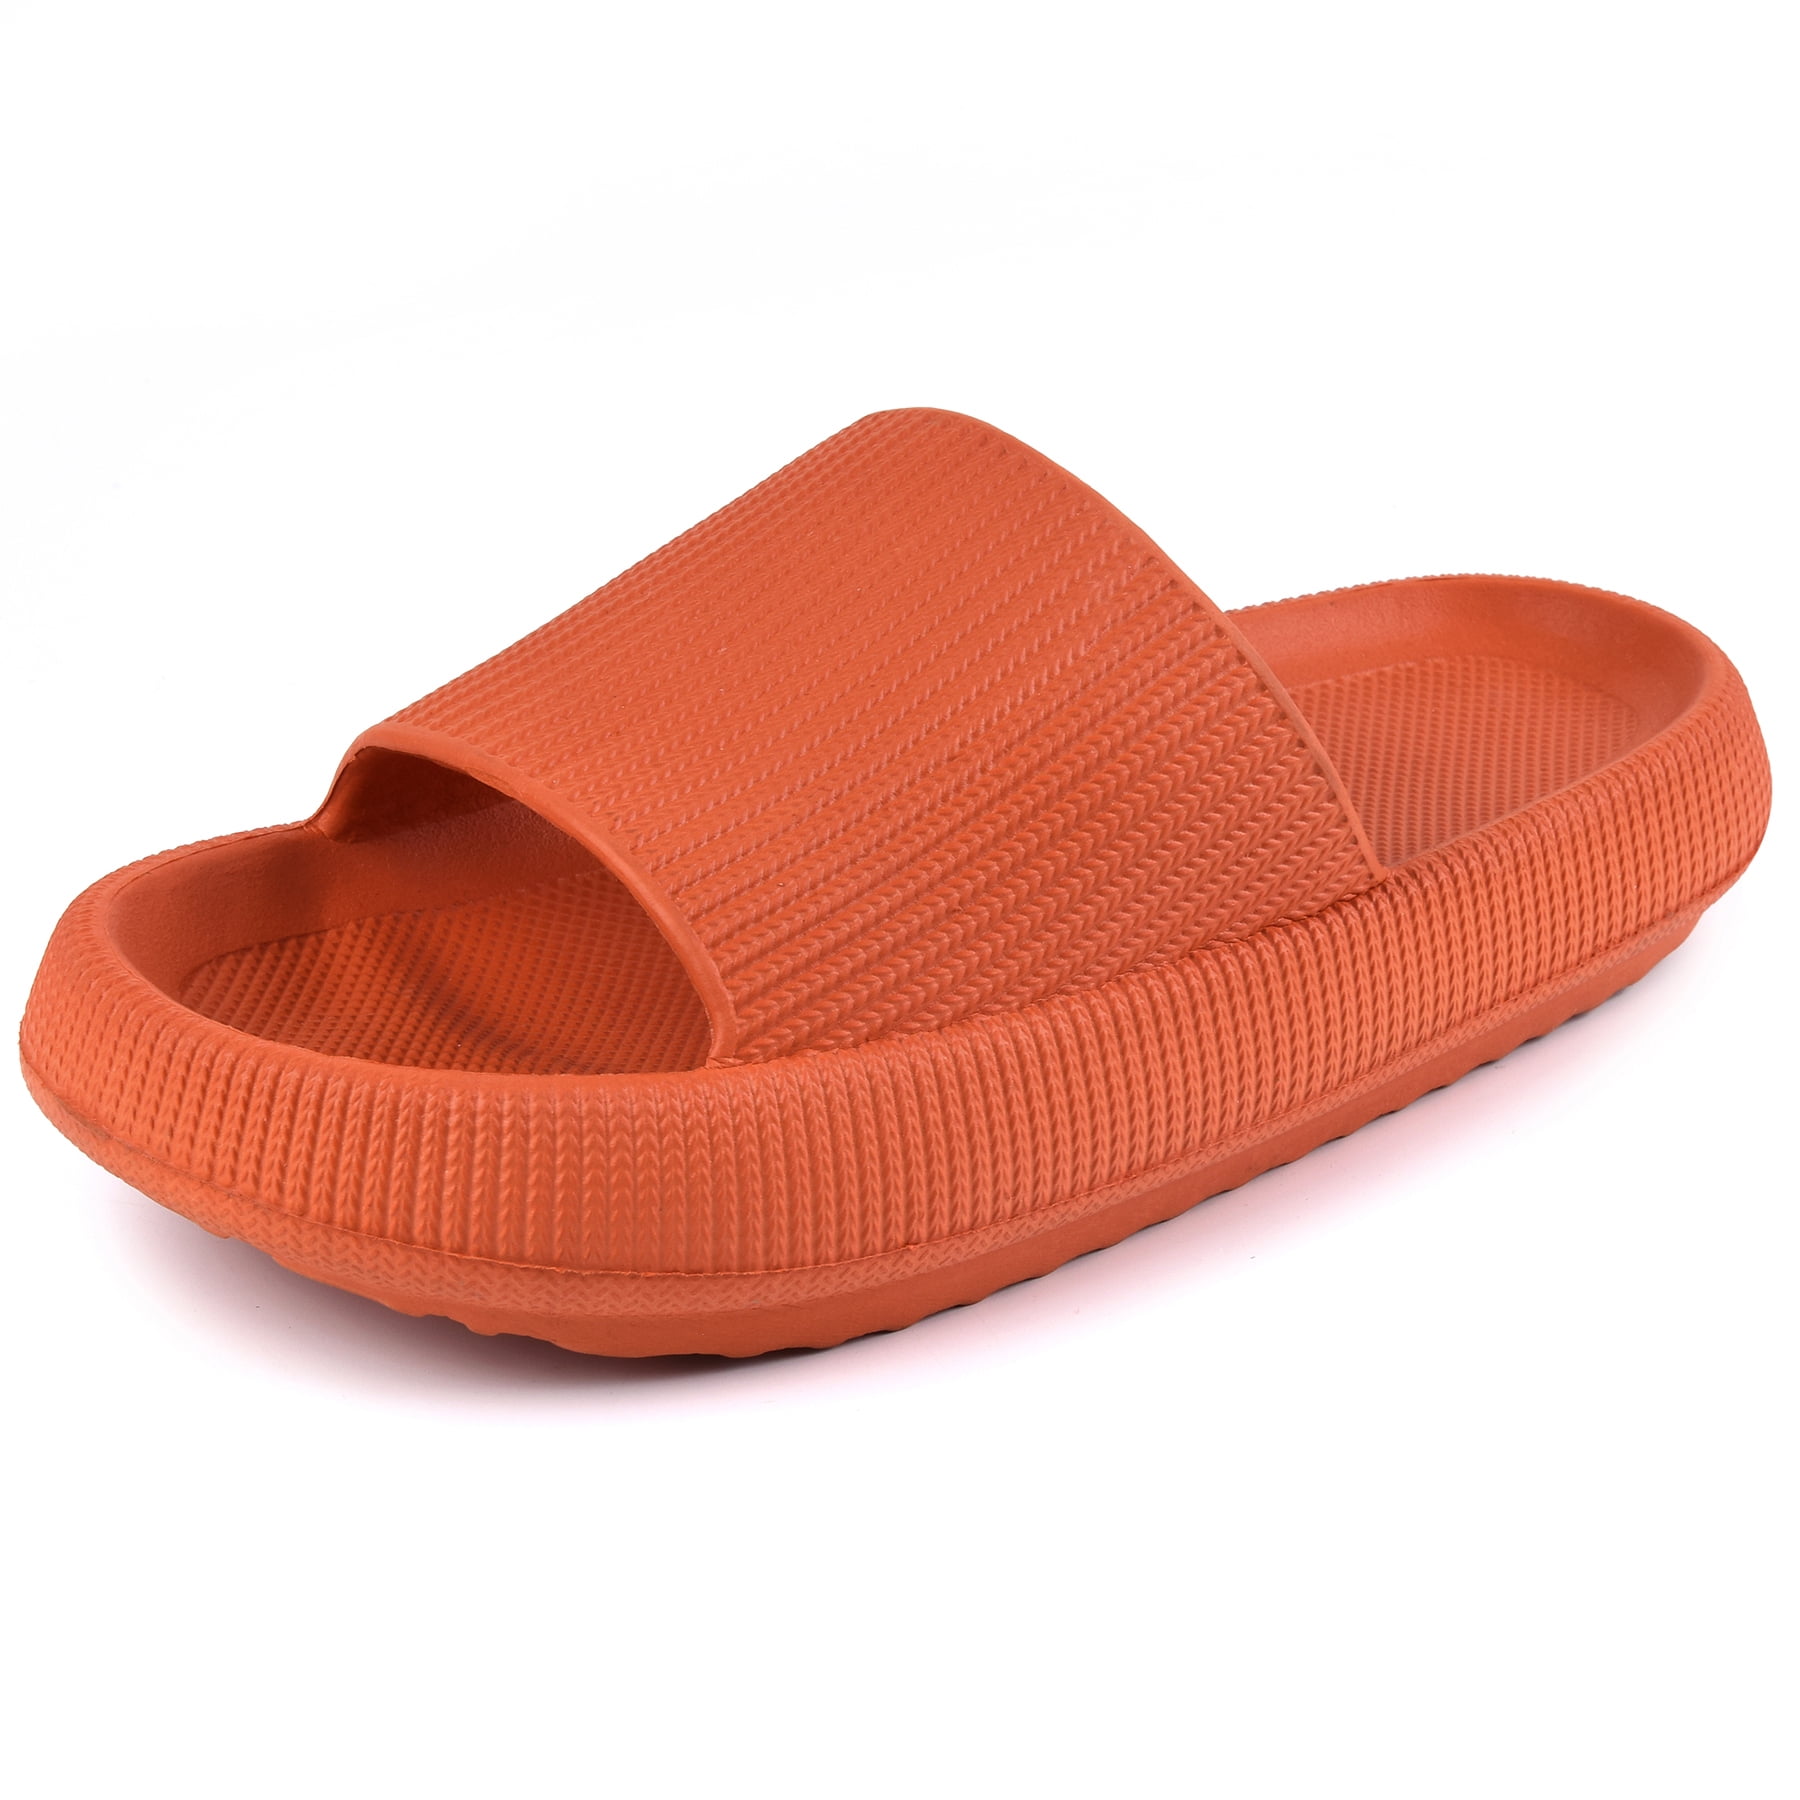 Manooby Women Stretch Cross Orthotic Slide Sandals Platform Slipper Summer Open-Toe Outdoor Casual Wedge Beach Shoes